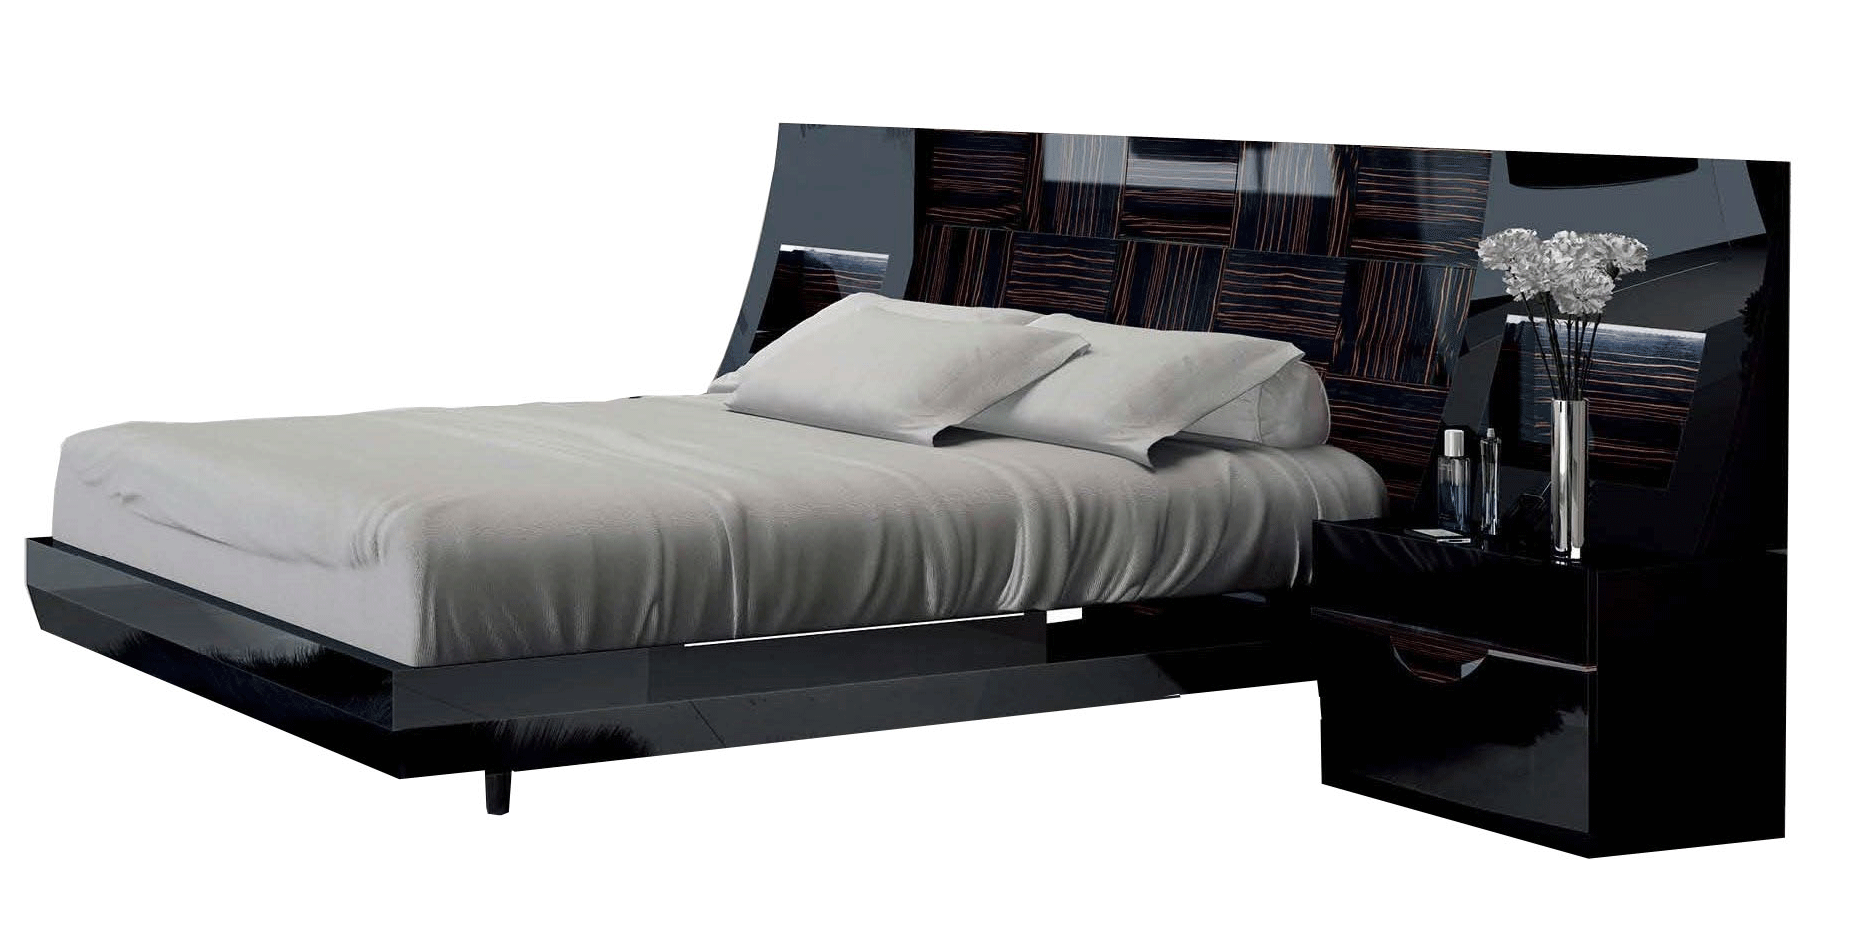 Brands Arredoclassic Bedroom, Italy Marbella Bed QS bed ONLY